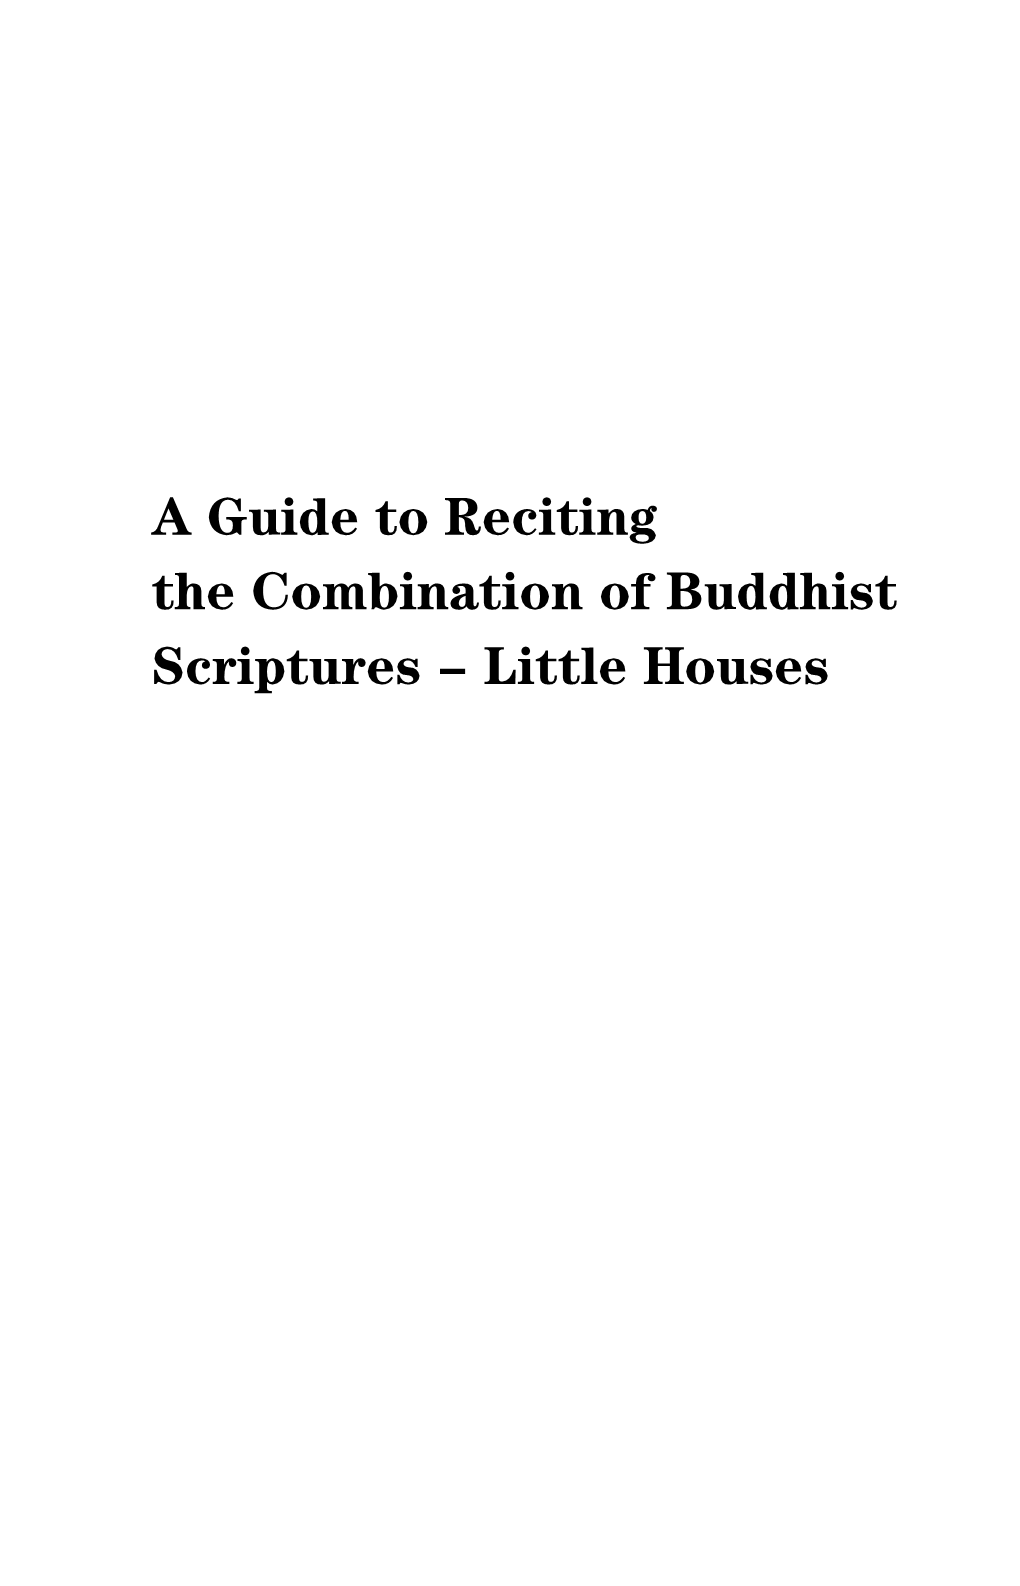 A Guide to Reciting the Combination of Buddhist Scriptures - Little Houses